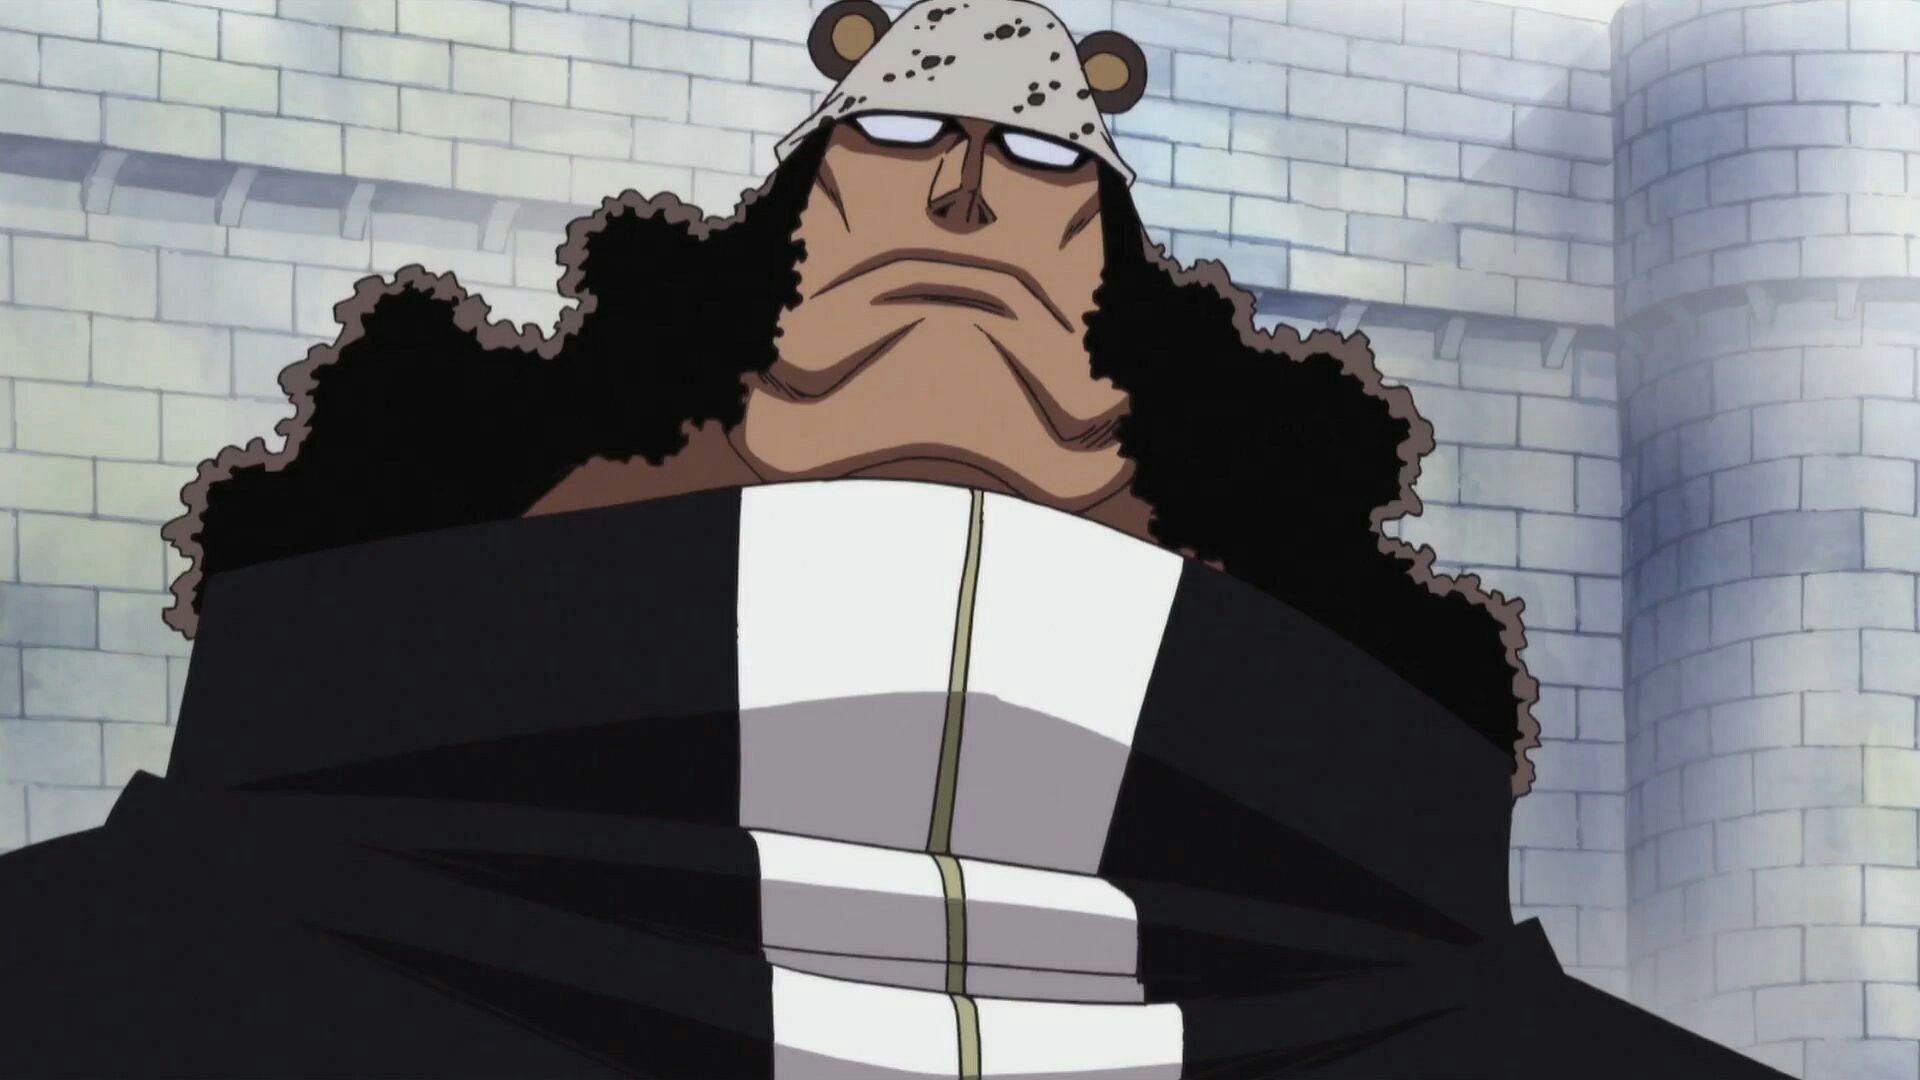 The tyrant gets his revenge on Saturn to kick off One Piece chapter 1104 (Image via Toei Animation)